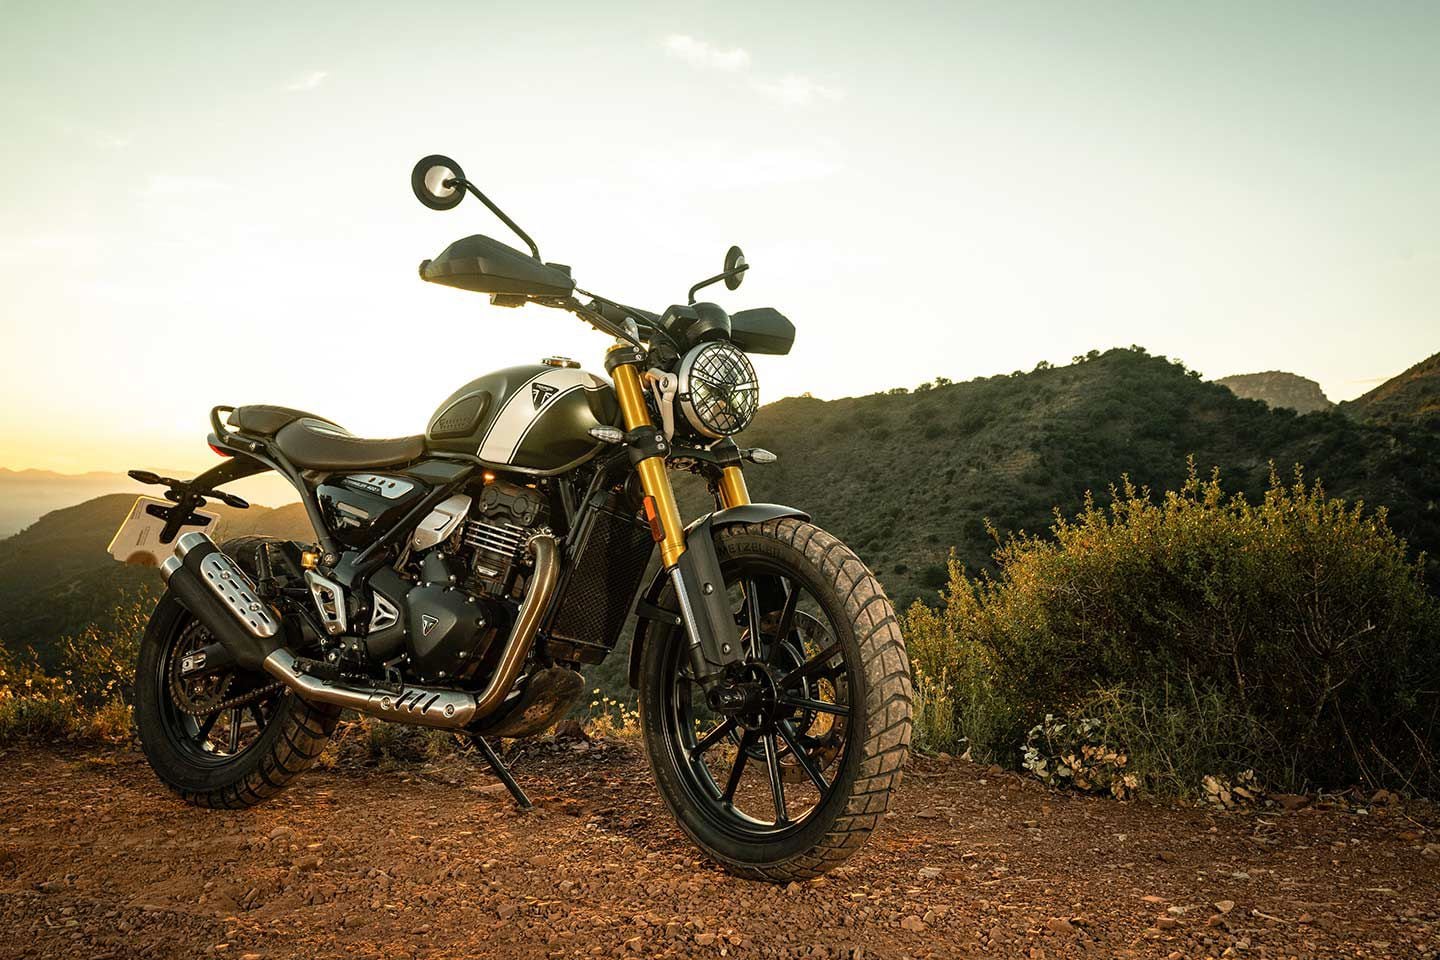 Triumph’s Scrambler 400 X gets a host of parts to set it apart visually from the Speed 400: a headlight grille, skid plate, dual-tip muffler, and hand guards. It also has a taller, wider handlebar.